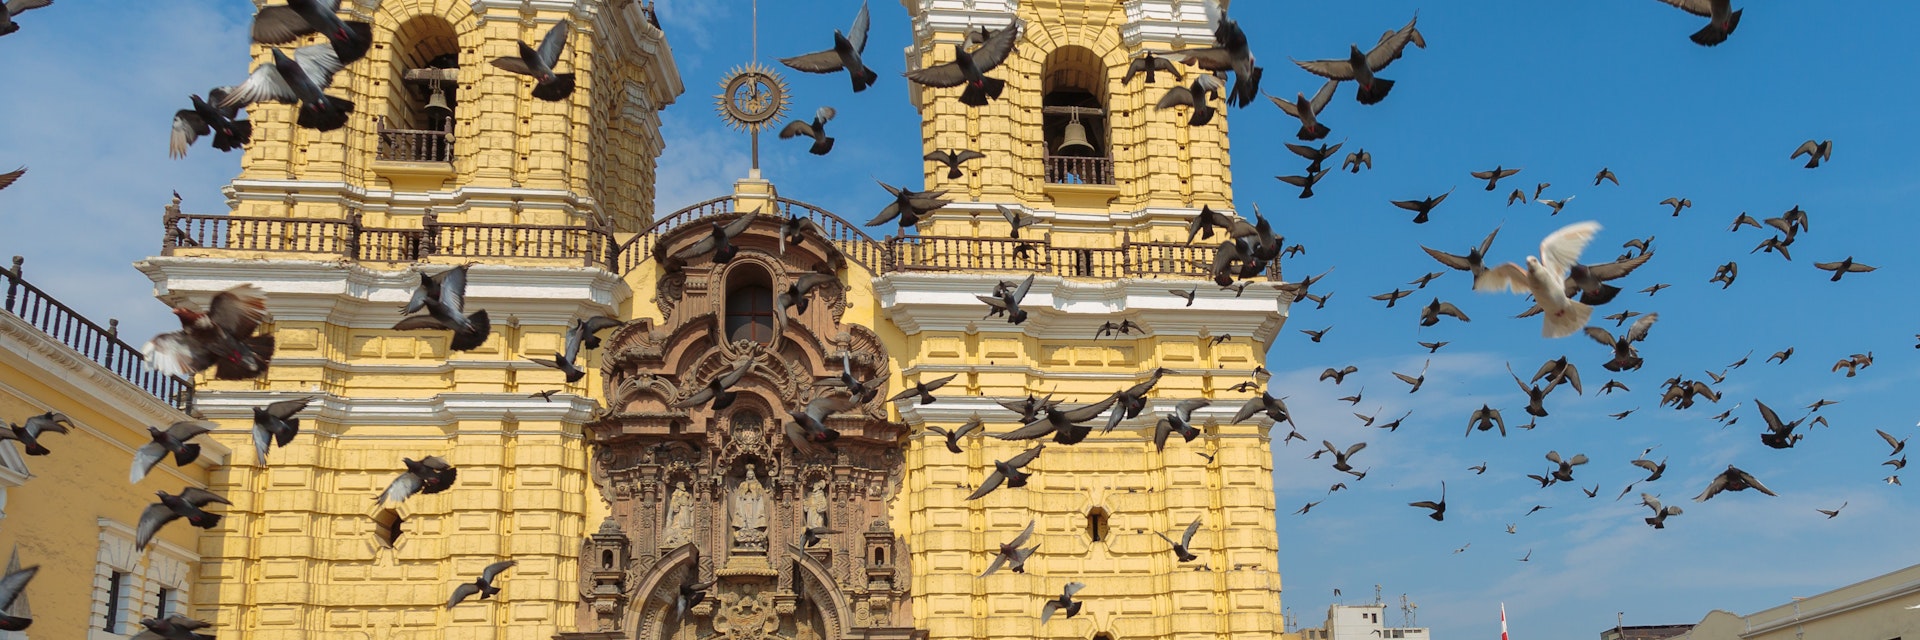 LIMA - PERU: San Francisco church in the down town of the city; Shutterstock ID 188447948; your: Claire Naylor; gl: 65050; netsuite: Online editorial ; full: Best museums Lima